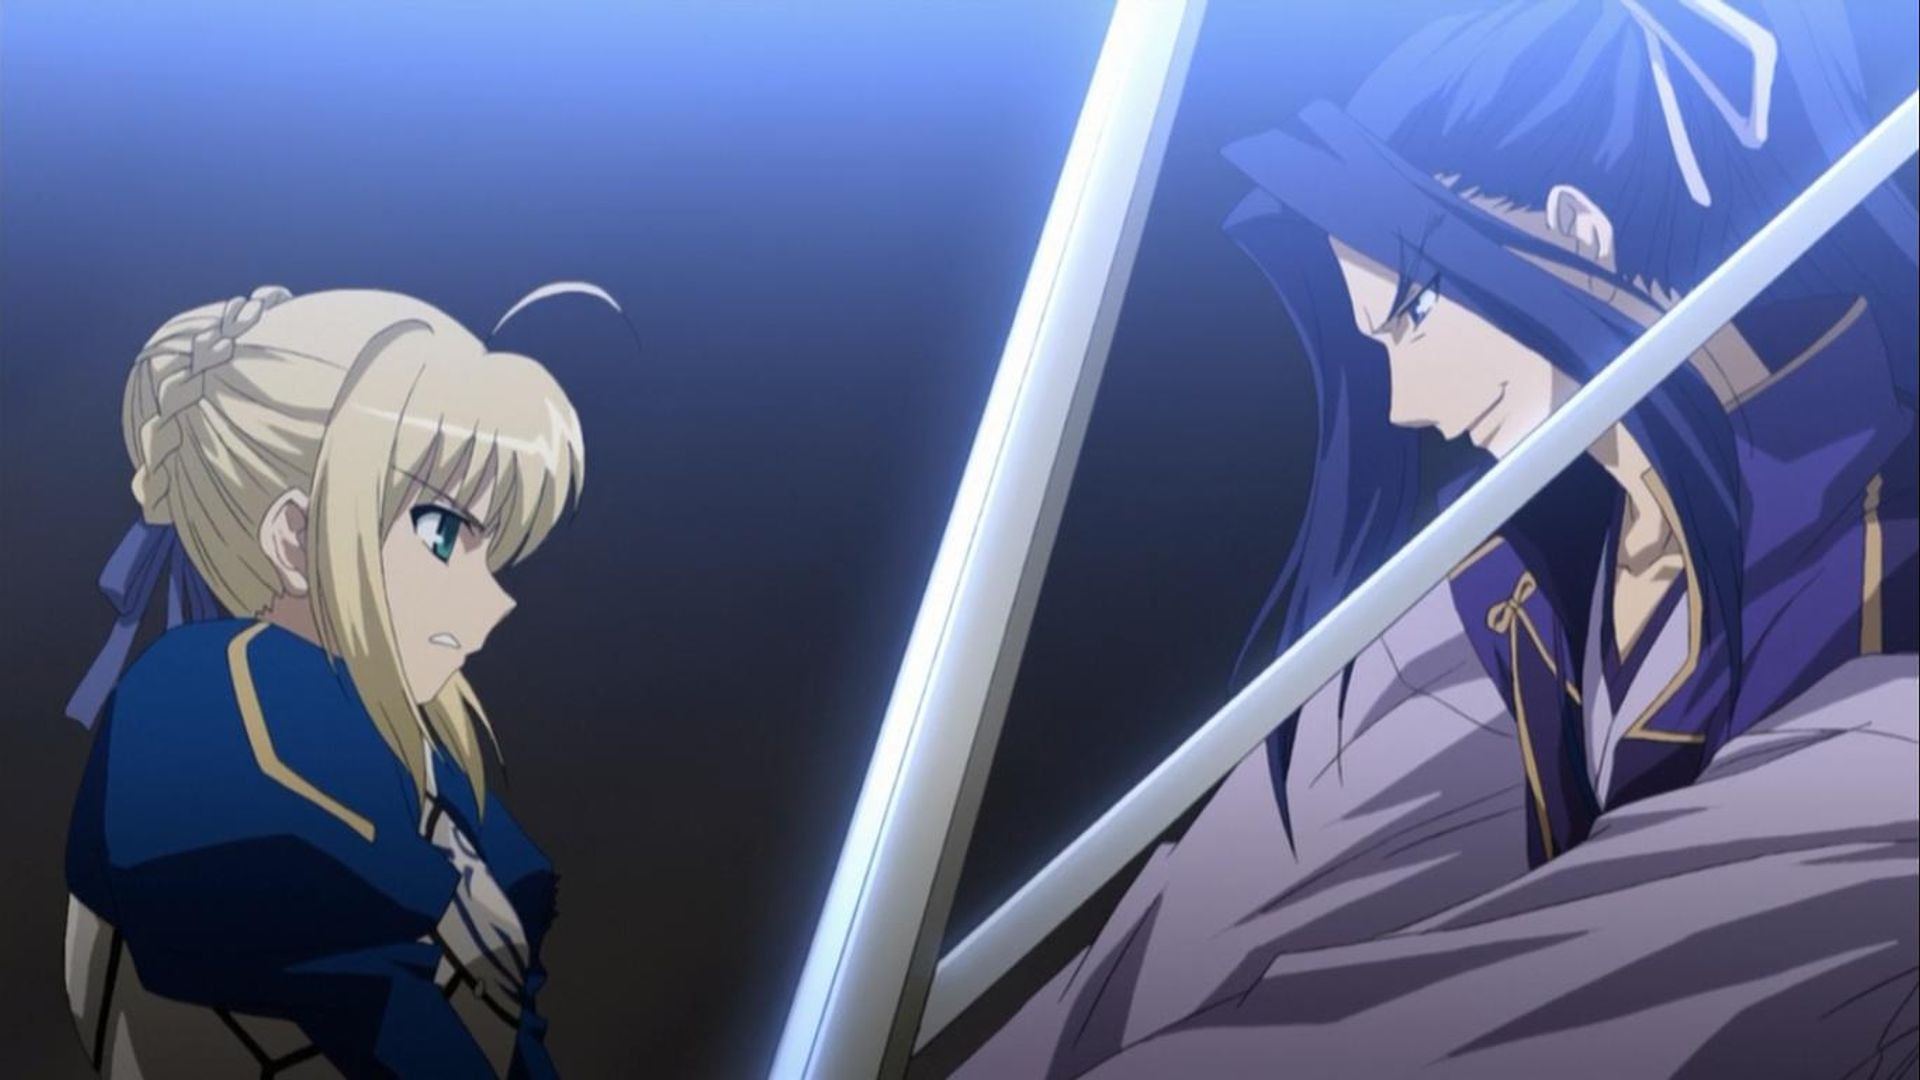 Fate/stay night background